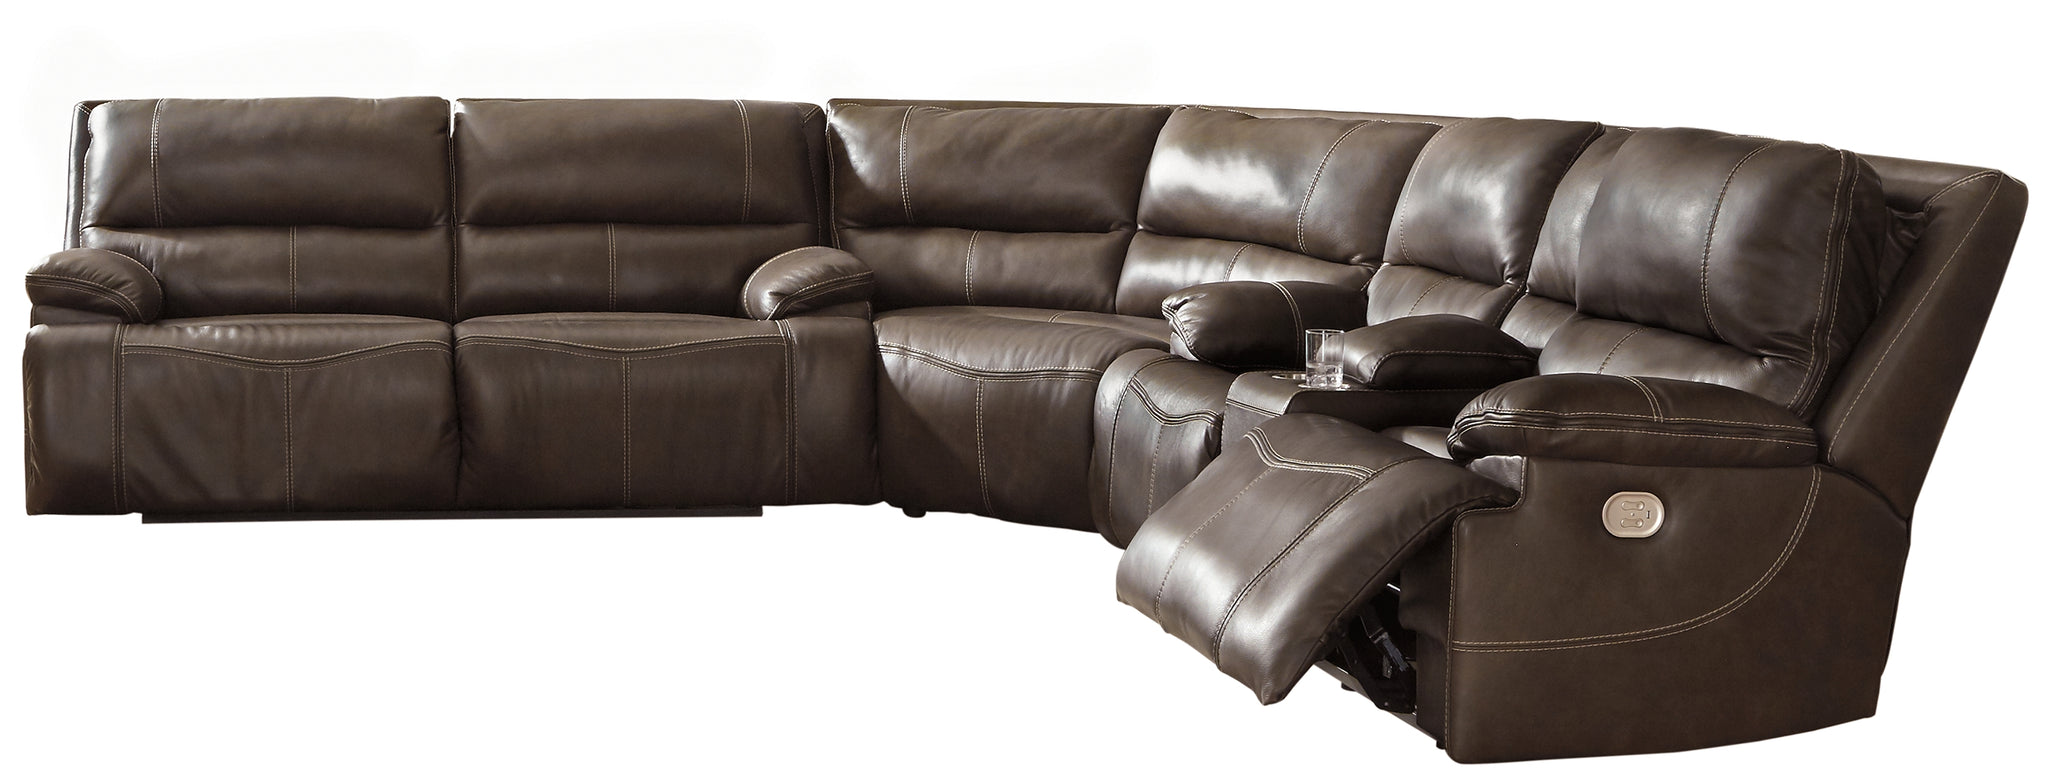 Ricmen Signature Design by Ashley 3-Piece Power Reclining Sectional